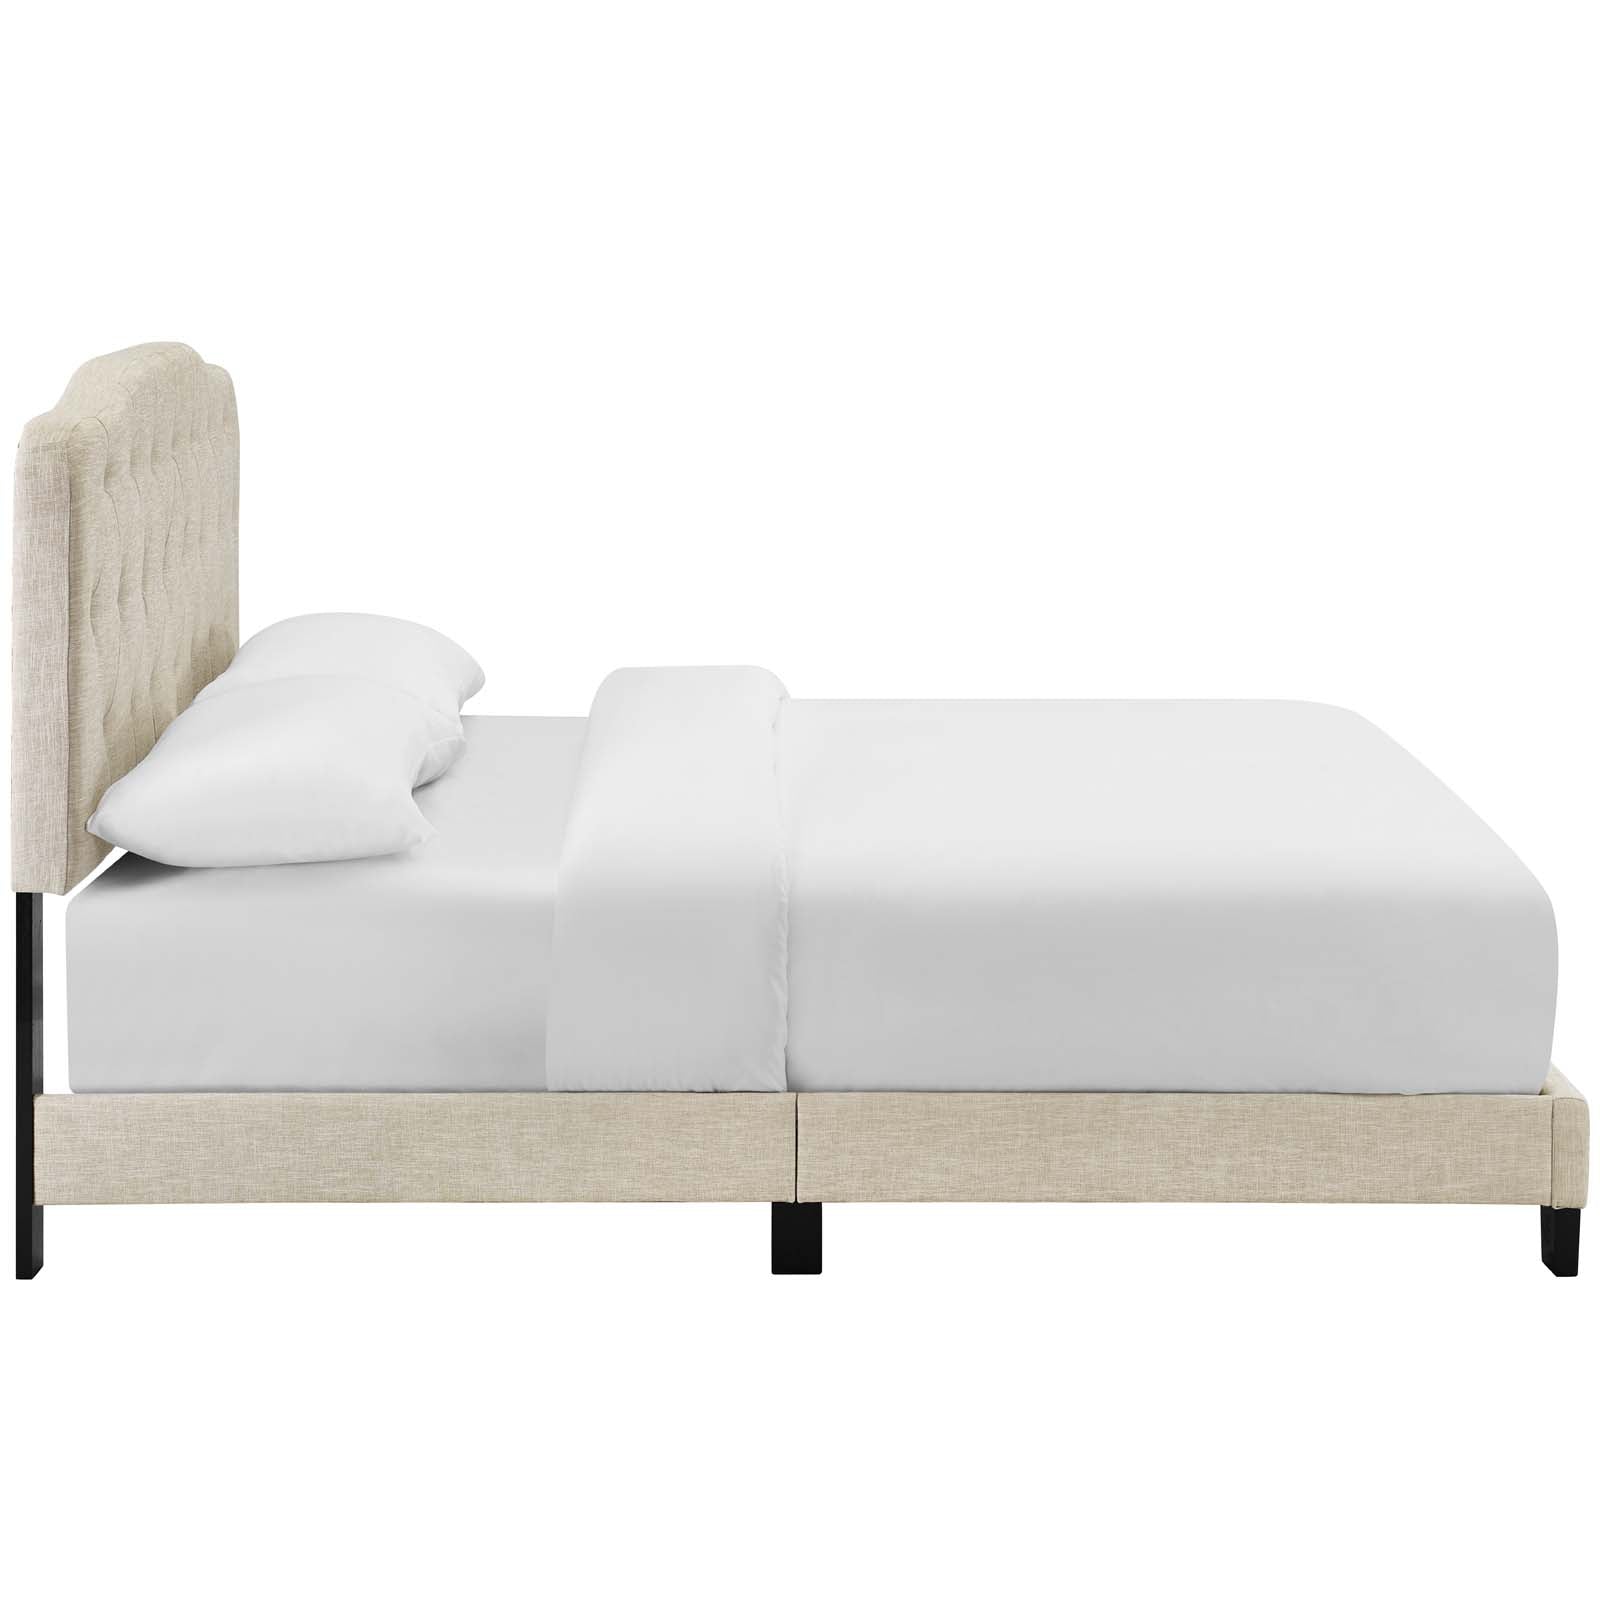 Modway Beds - Amelia Queen Upholstered Fabric Bed Beige